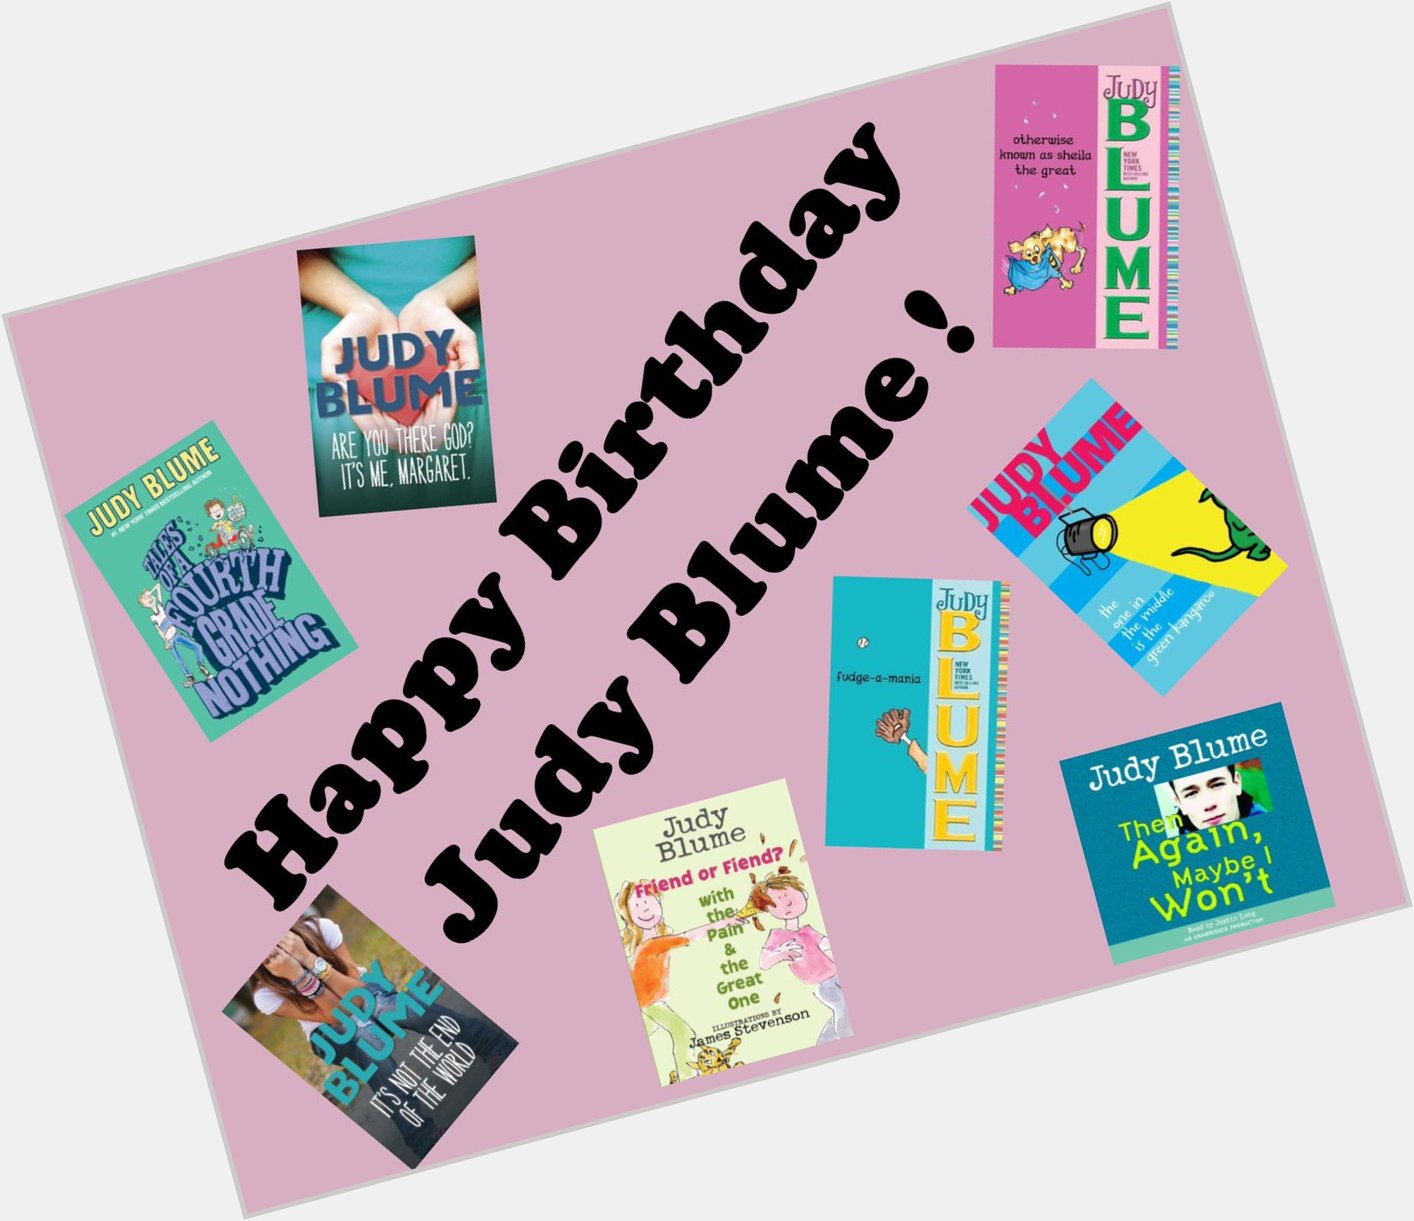 Happy birthday to author (for all ages!) Judy Blume!   